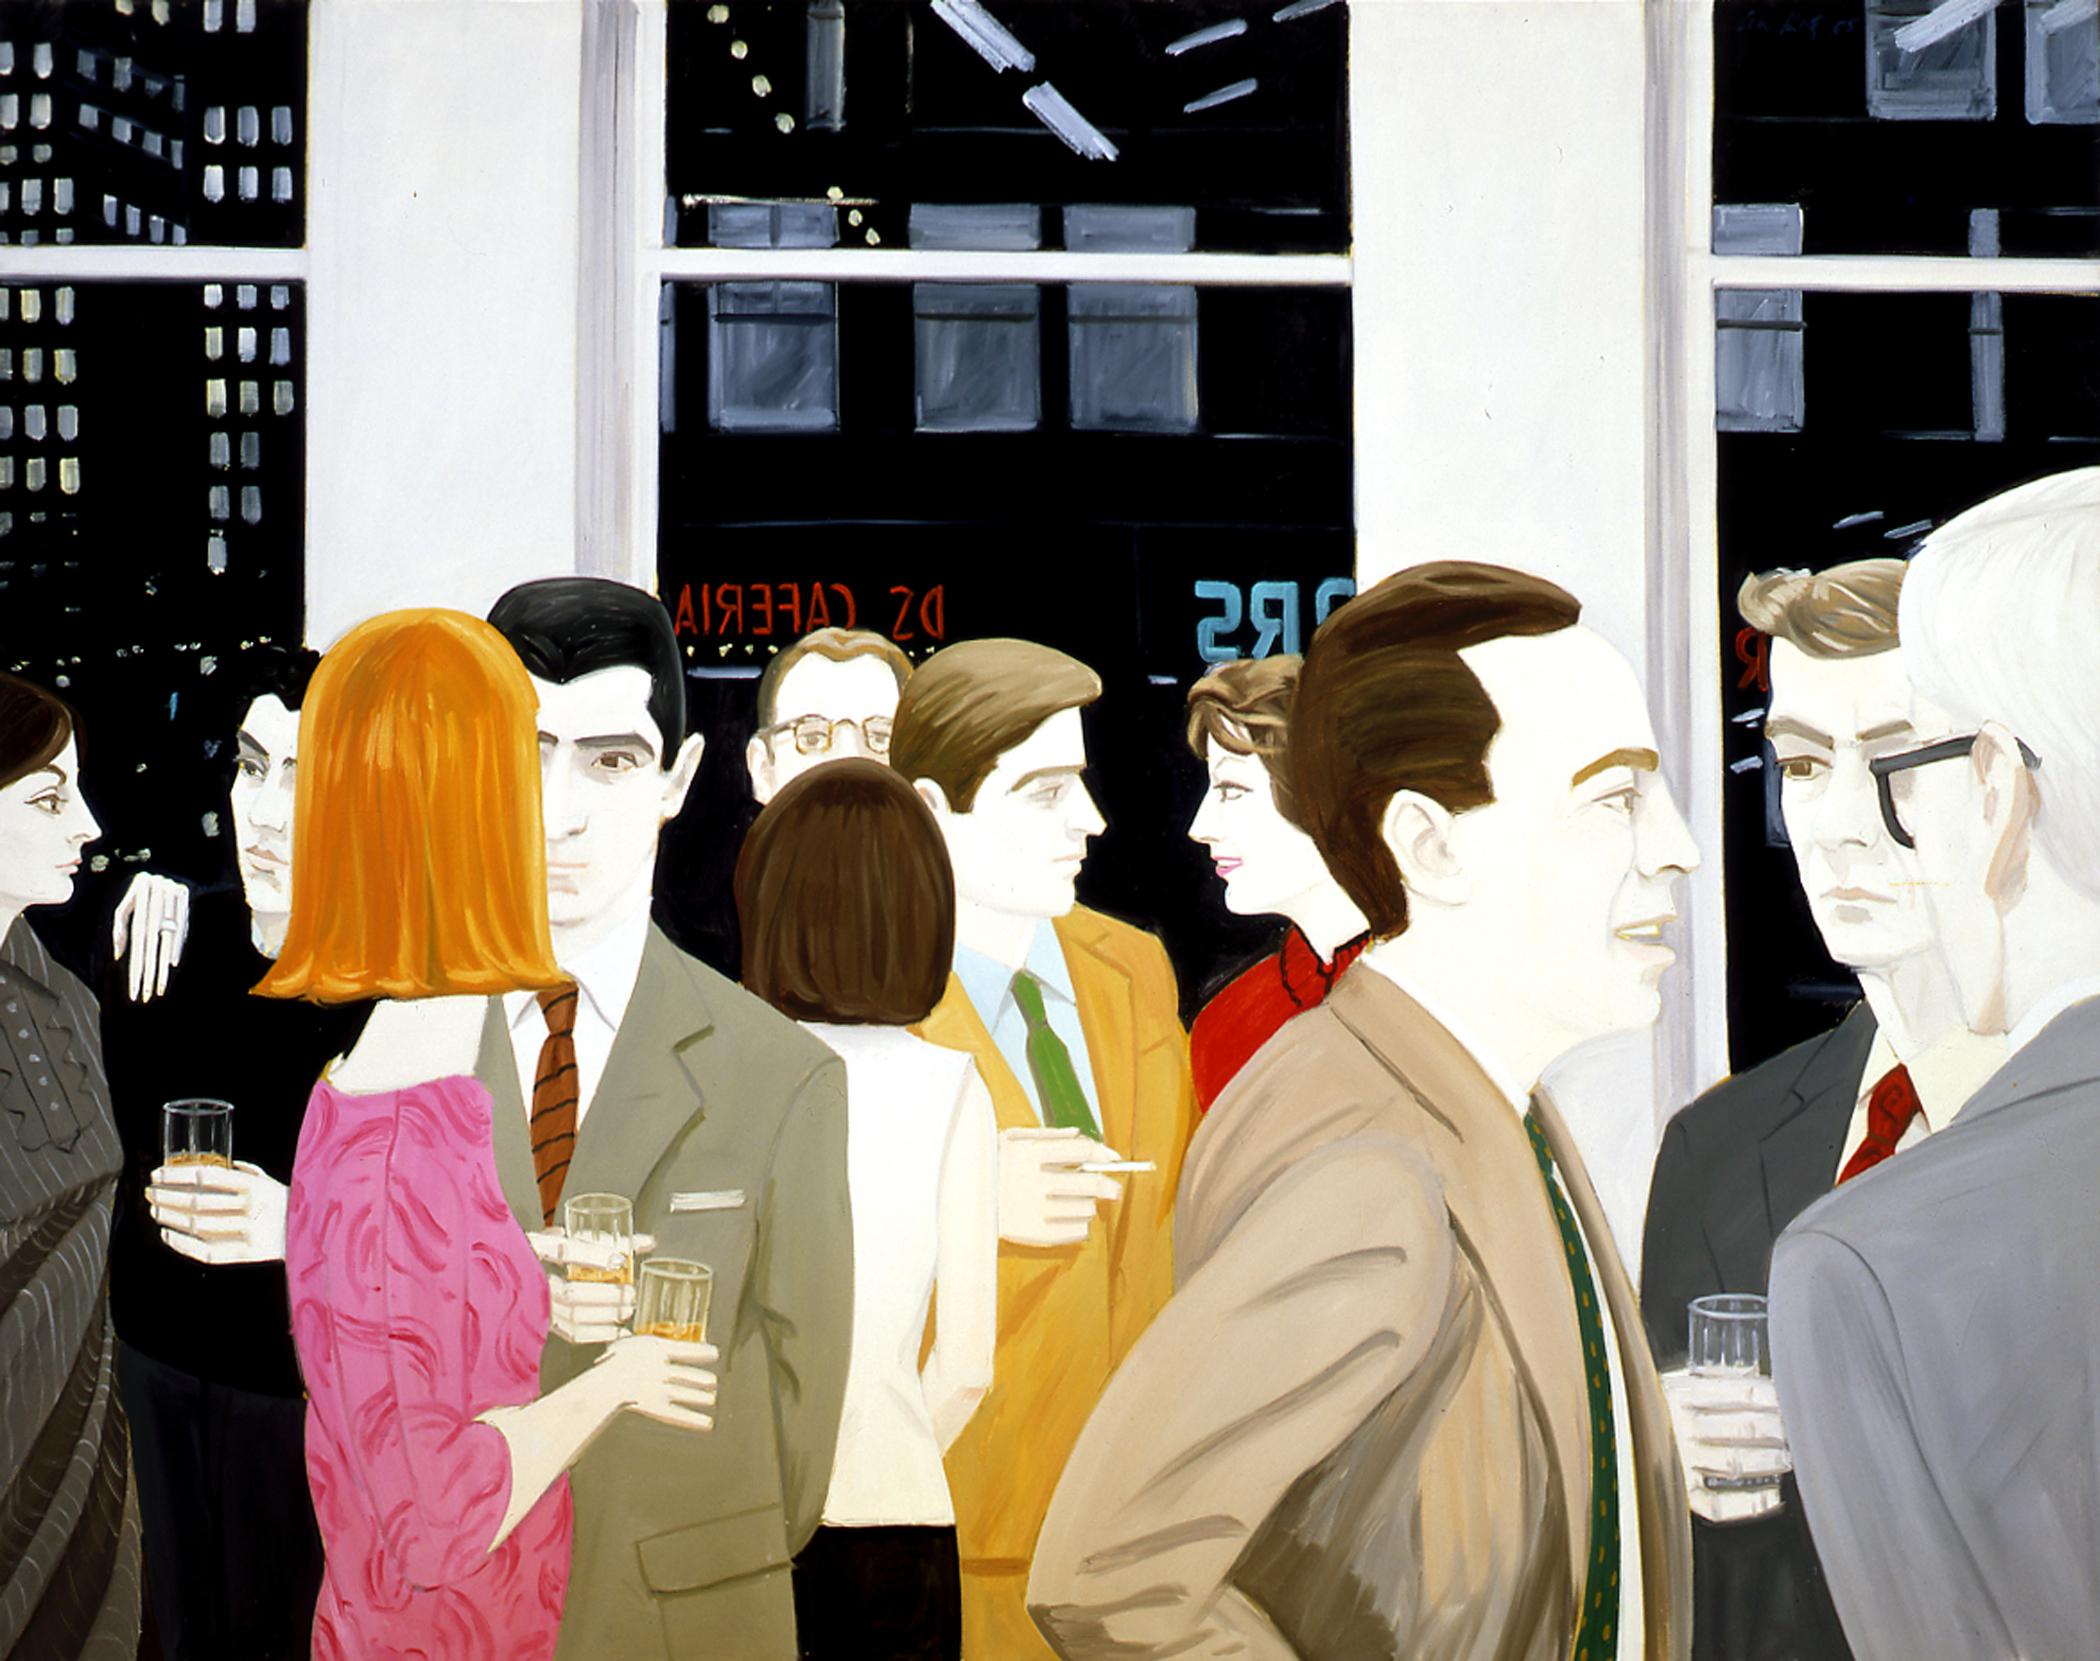 Alex Katz, Written by Carter Ratcliff, Edited by Vincent Katz

The definitive Alex Katz book, like his iconic paintings, is larger than life. With more than 300 images, many unpublished, and a searching profile by an art historian who has studied